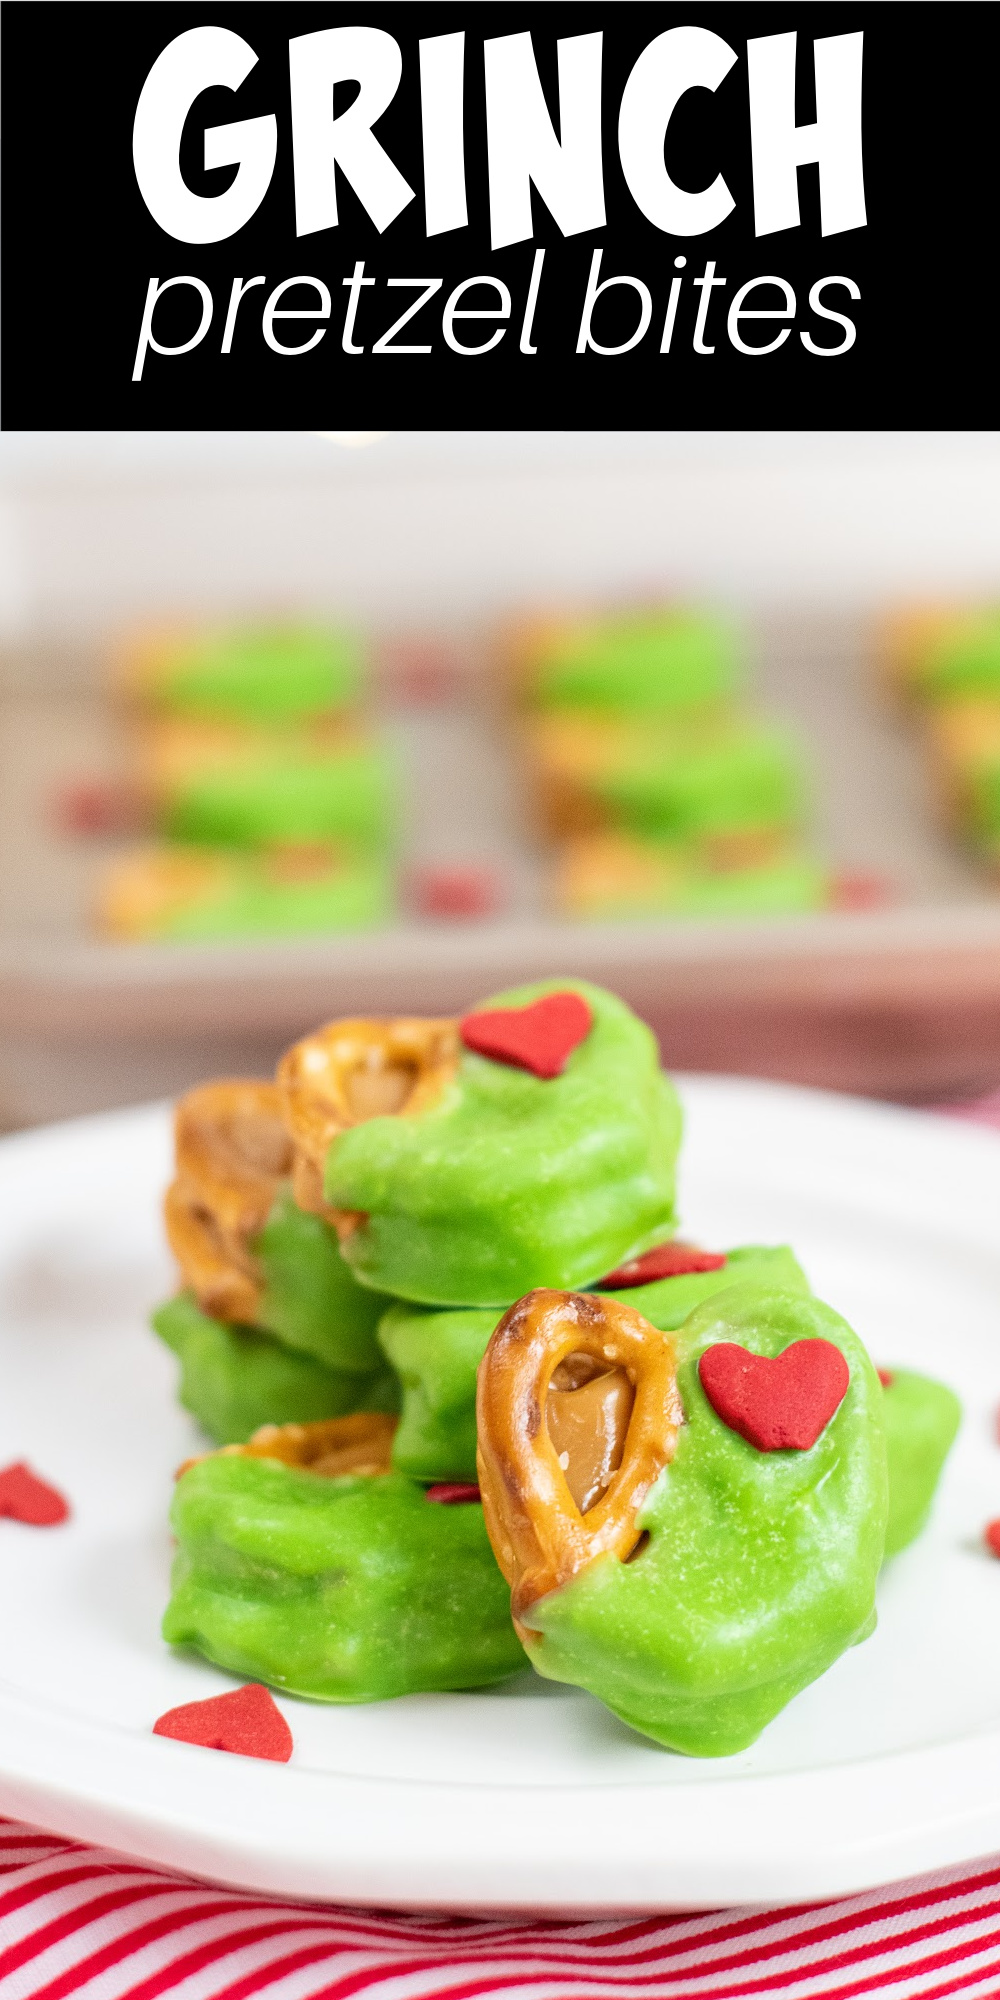 Grinch pretzel bites are salty and sweet treats in a cute Christmas theme. Melted caramels are smashed between two salty pretzels, dipped in sweet chocolate with a red candy heart.